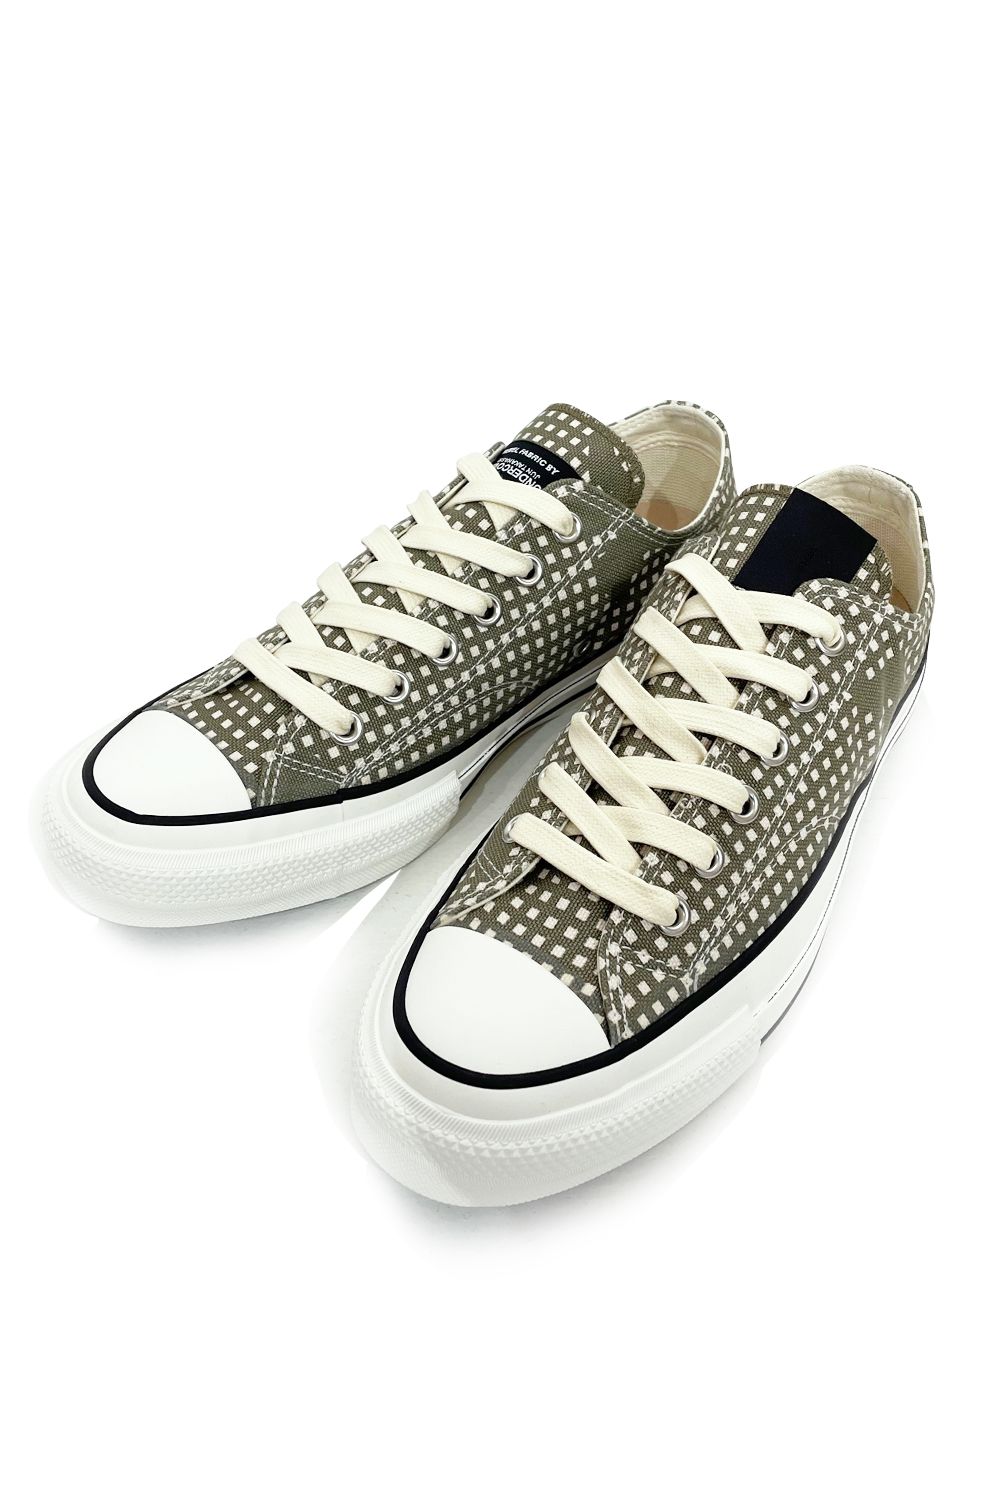 N.HOOLYWOOD COMPILE LINE x CONVERSE ADDICT x UNDERCOVER エヌ ...